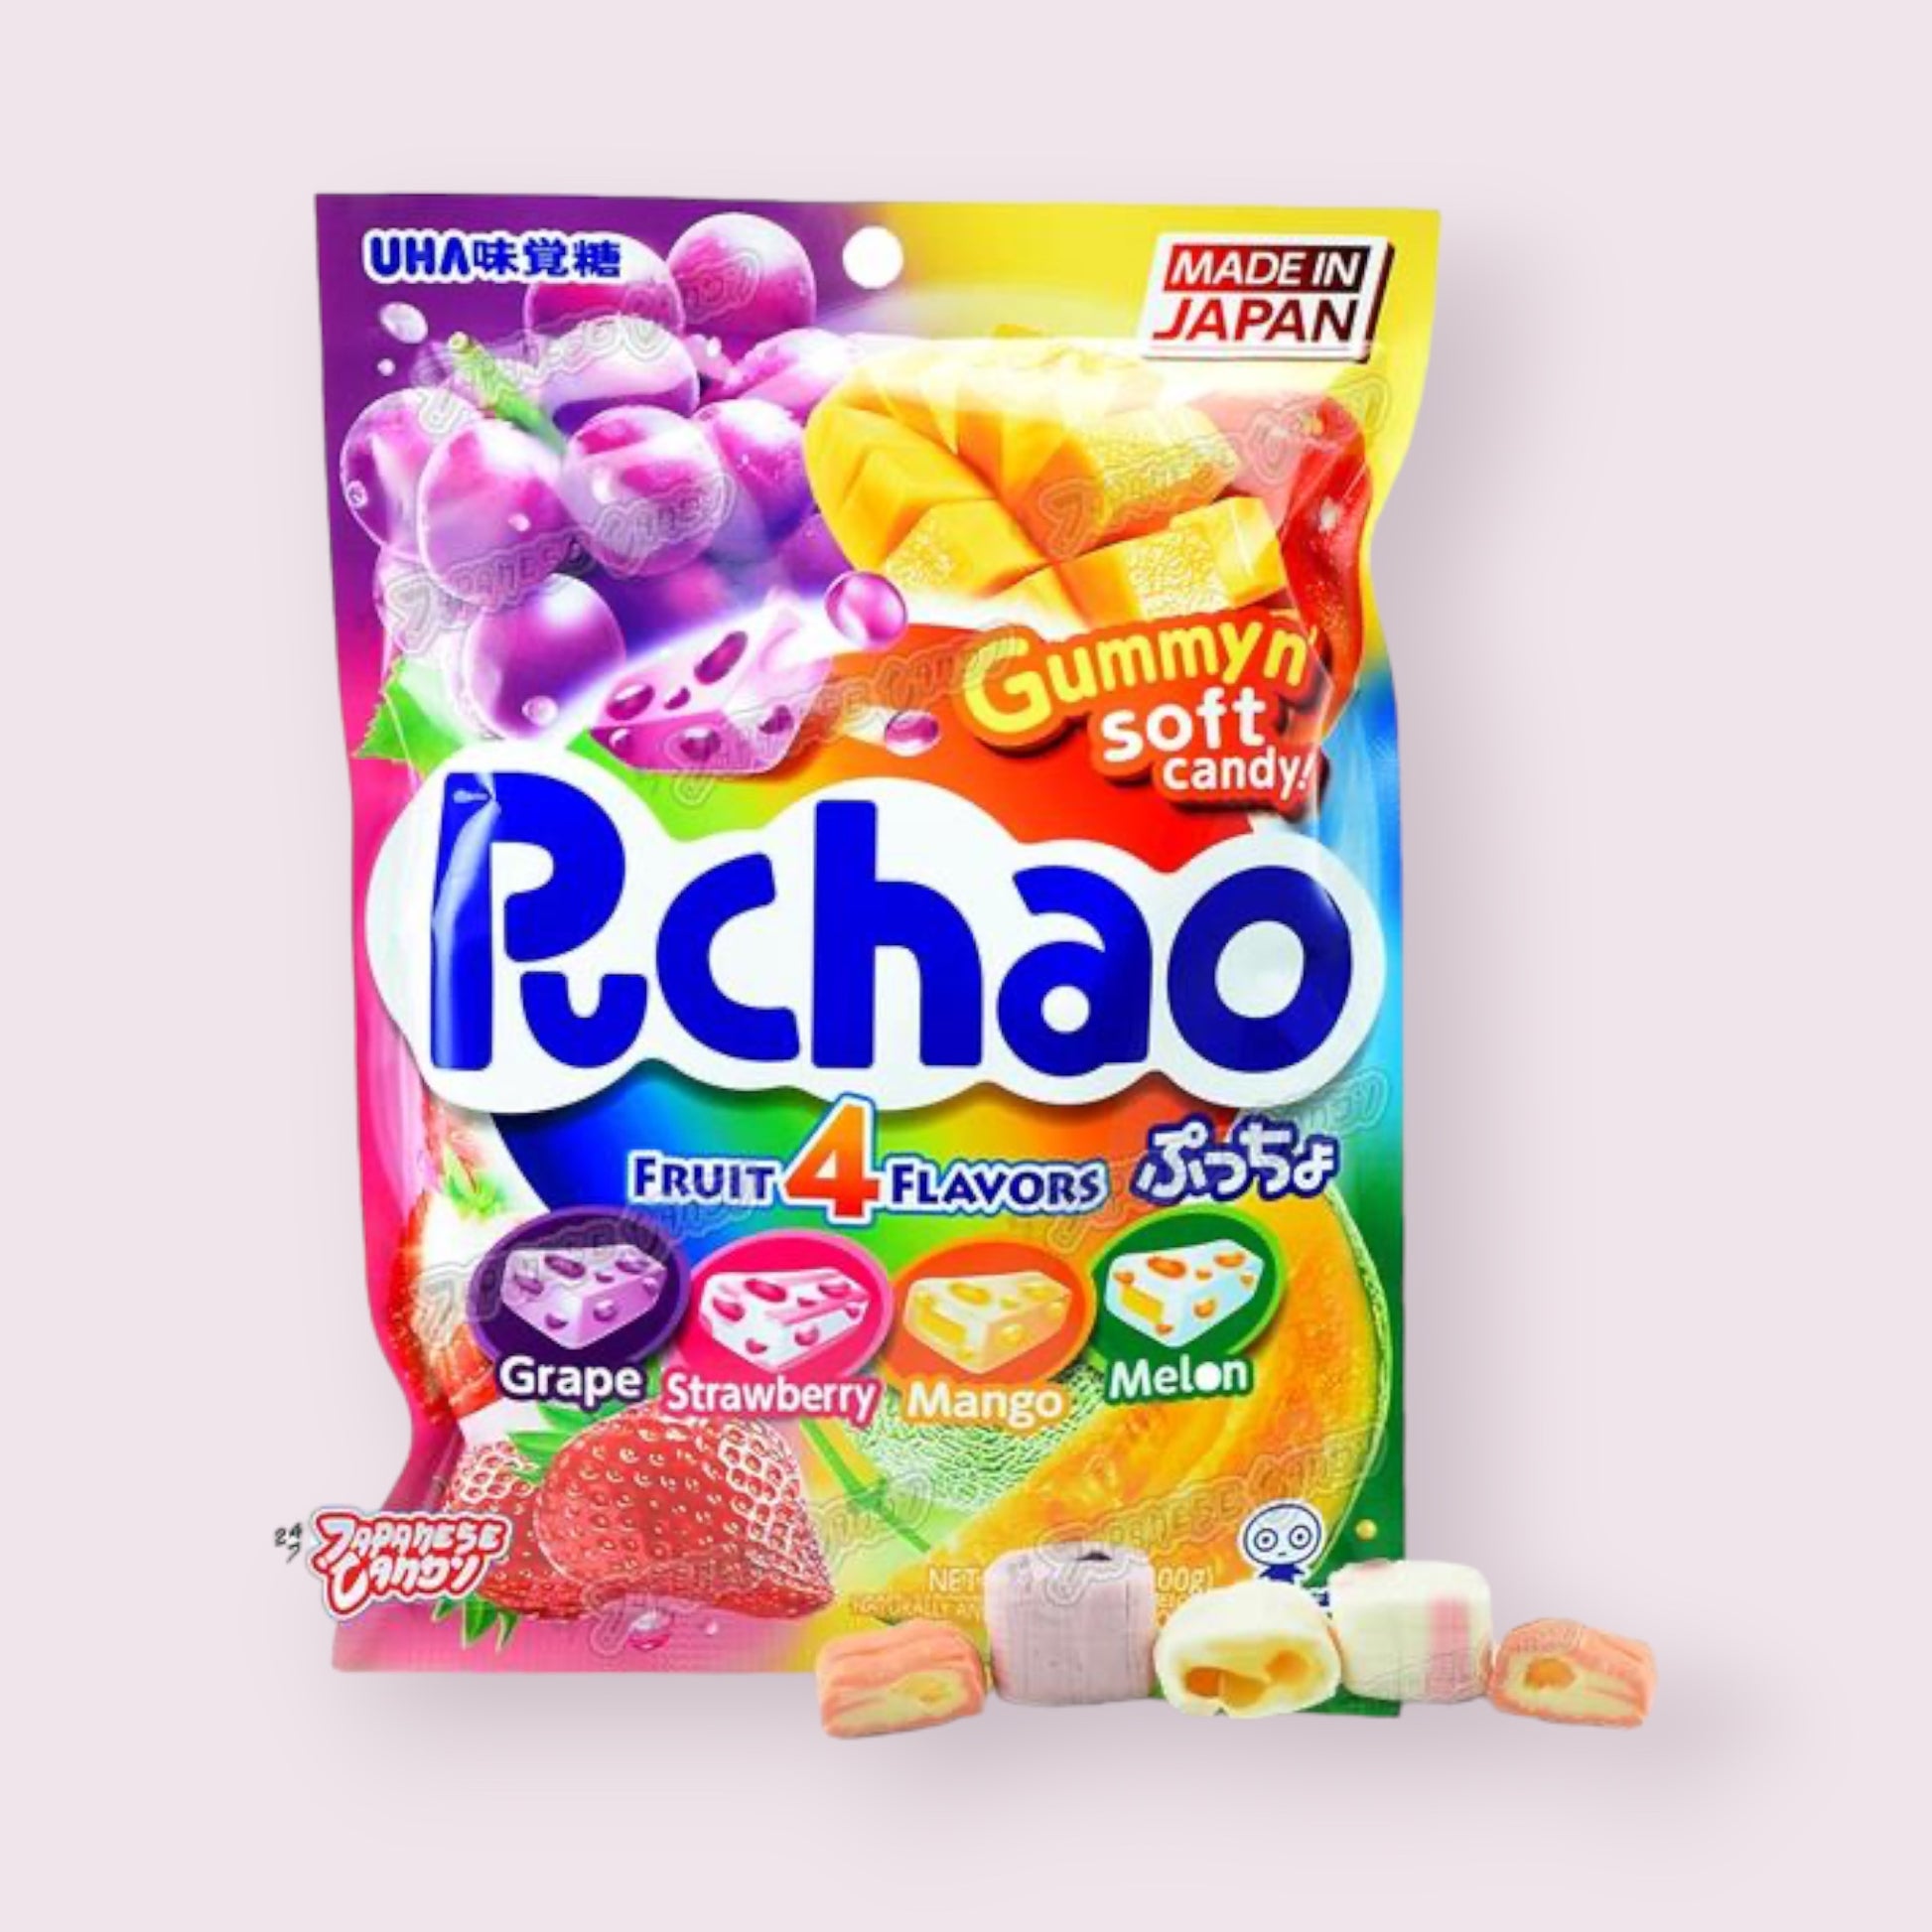 Puchao Bags Japanese Pixie Candy Shoppe   